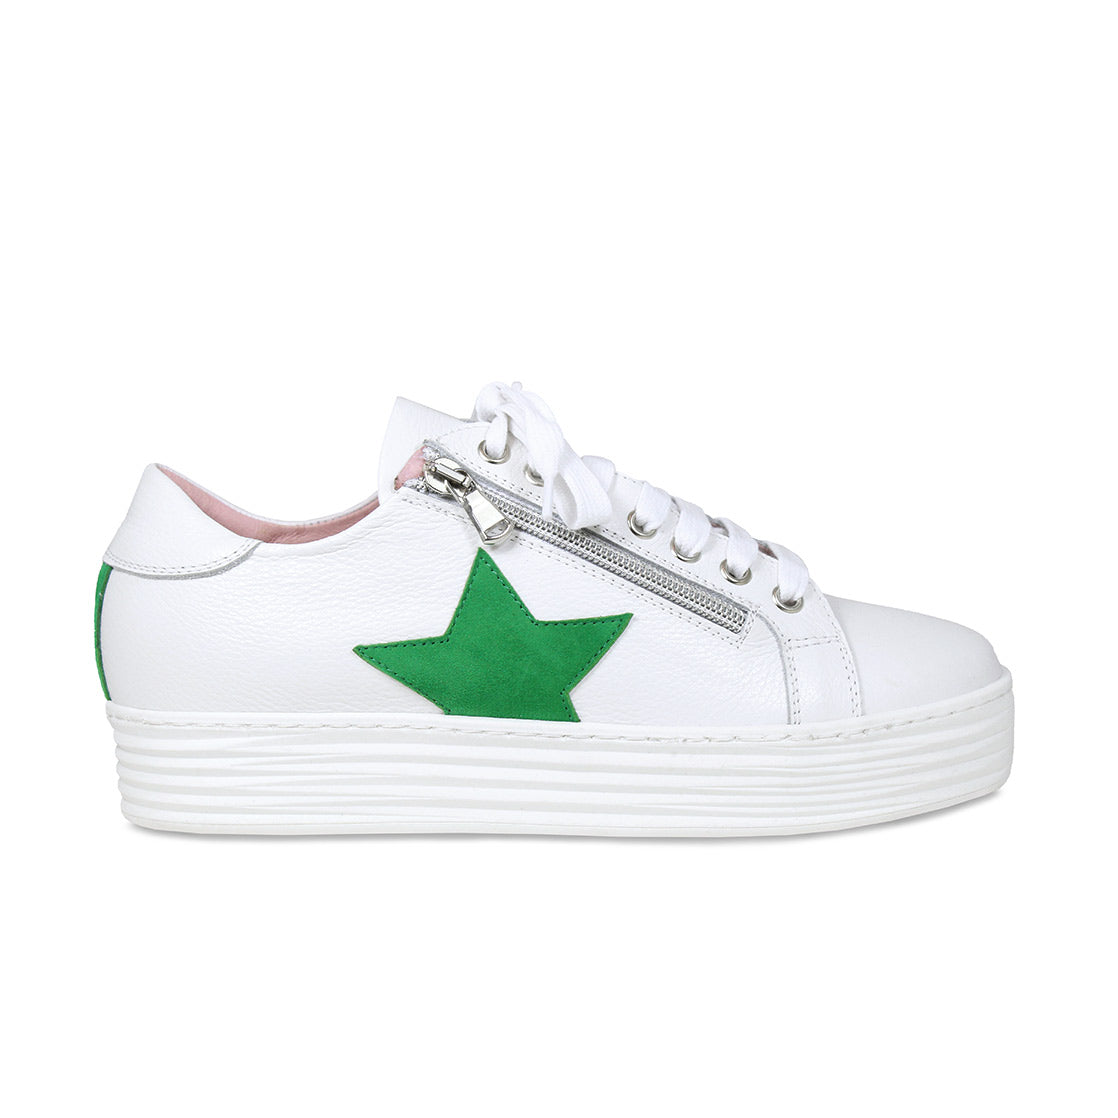 Star: White Leather & Emerald Suede